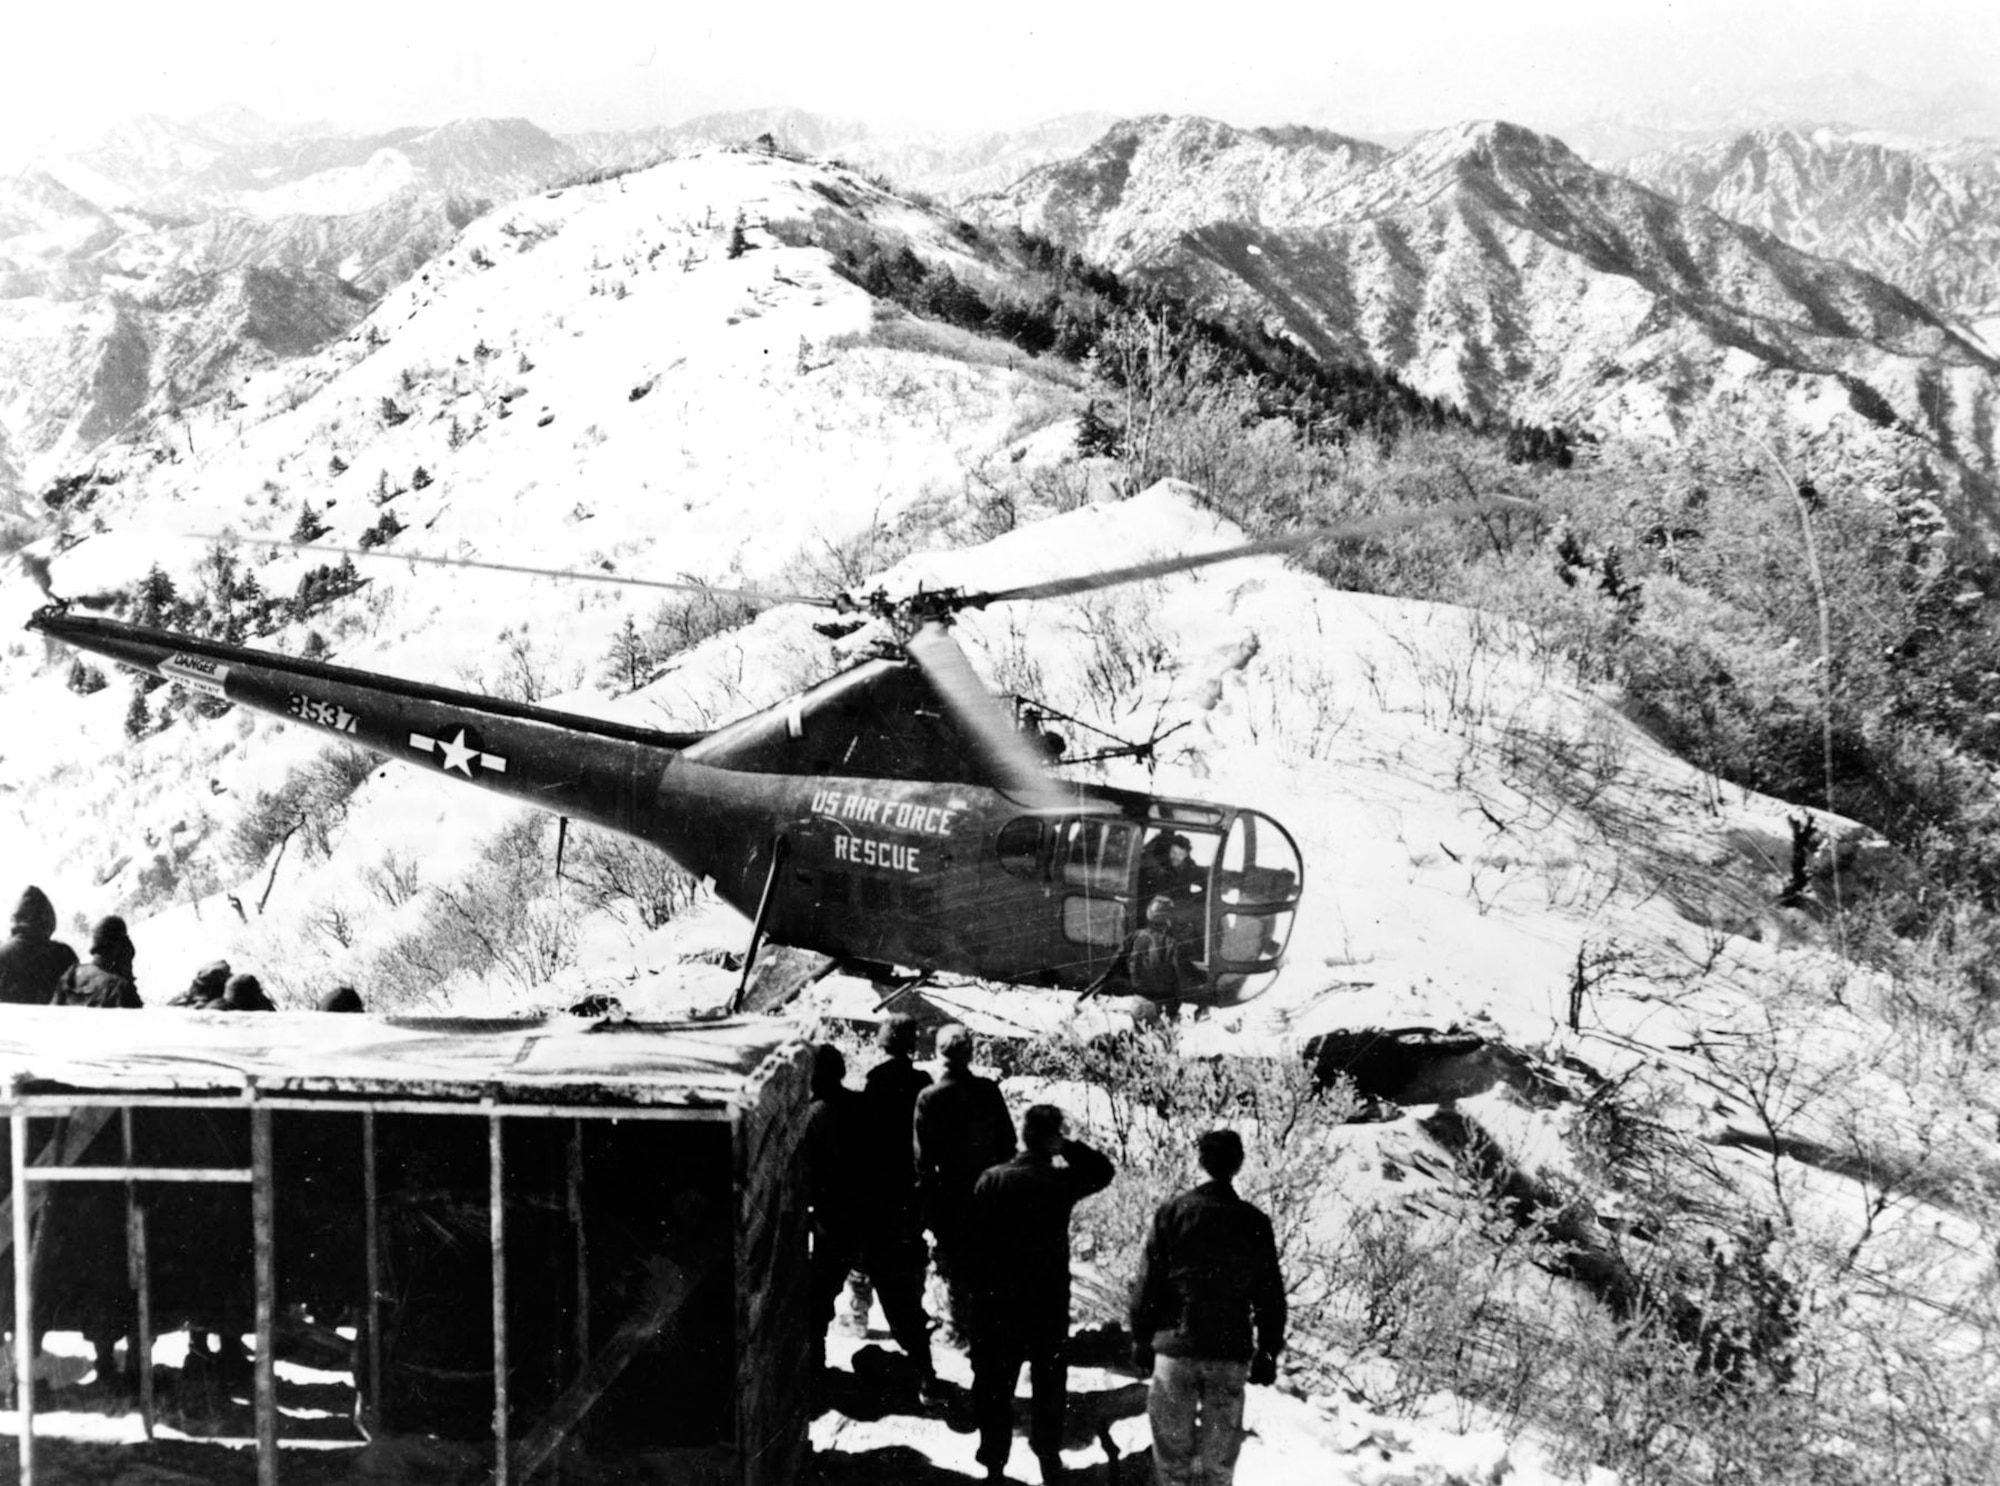 Extreme conditions and rugged terrain challenged Air Rescue Service crews. Here, an H-5G helicopter evacuates an injured Ethiopian UN soldier from a remote, snowy mountaintop radar site in March 1952. (U.S. Air Force photo)